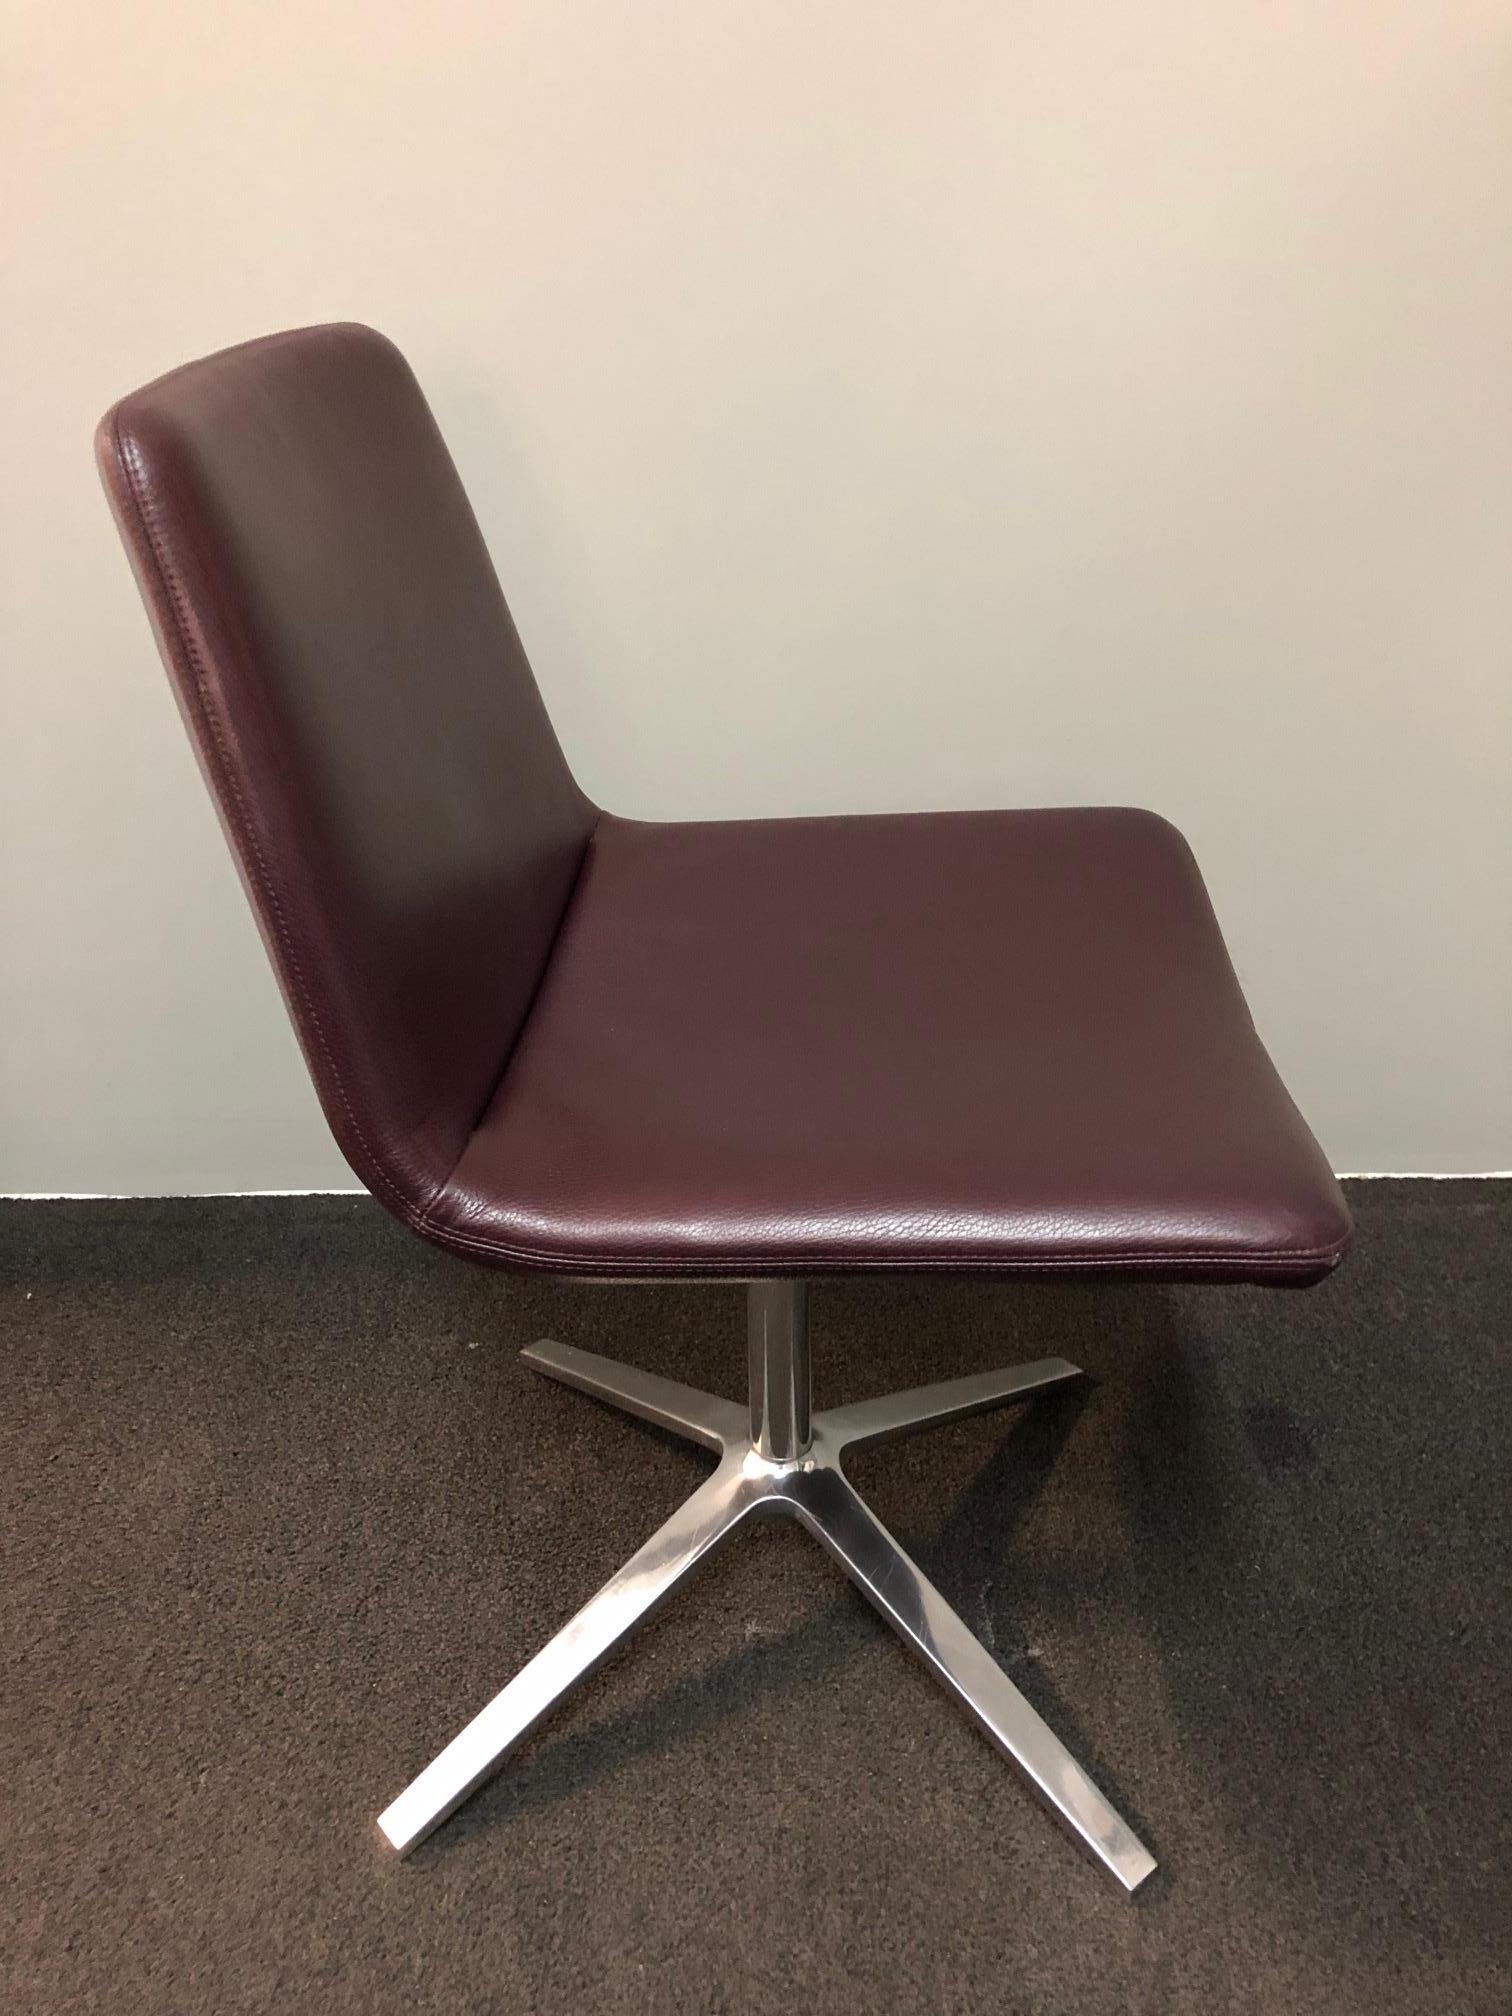 This is an evolution of the metropolitan chair. The renewed frames range from the more classic four bright brushed aluminium spokes with swivel seat. The frame has some scratched due to use of the chair. The burgundy leather is stunning.